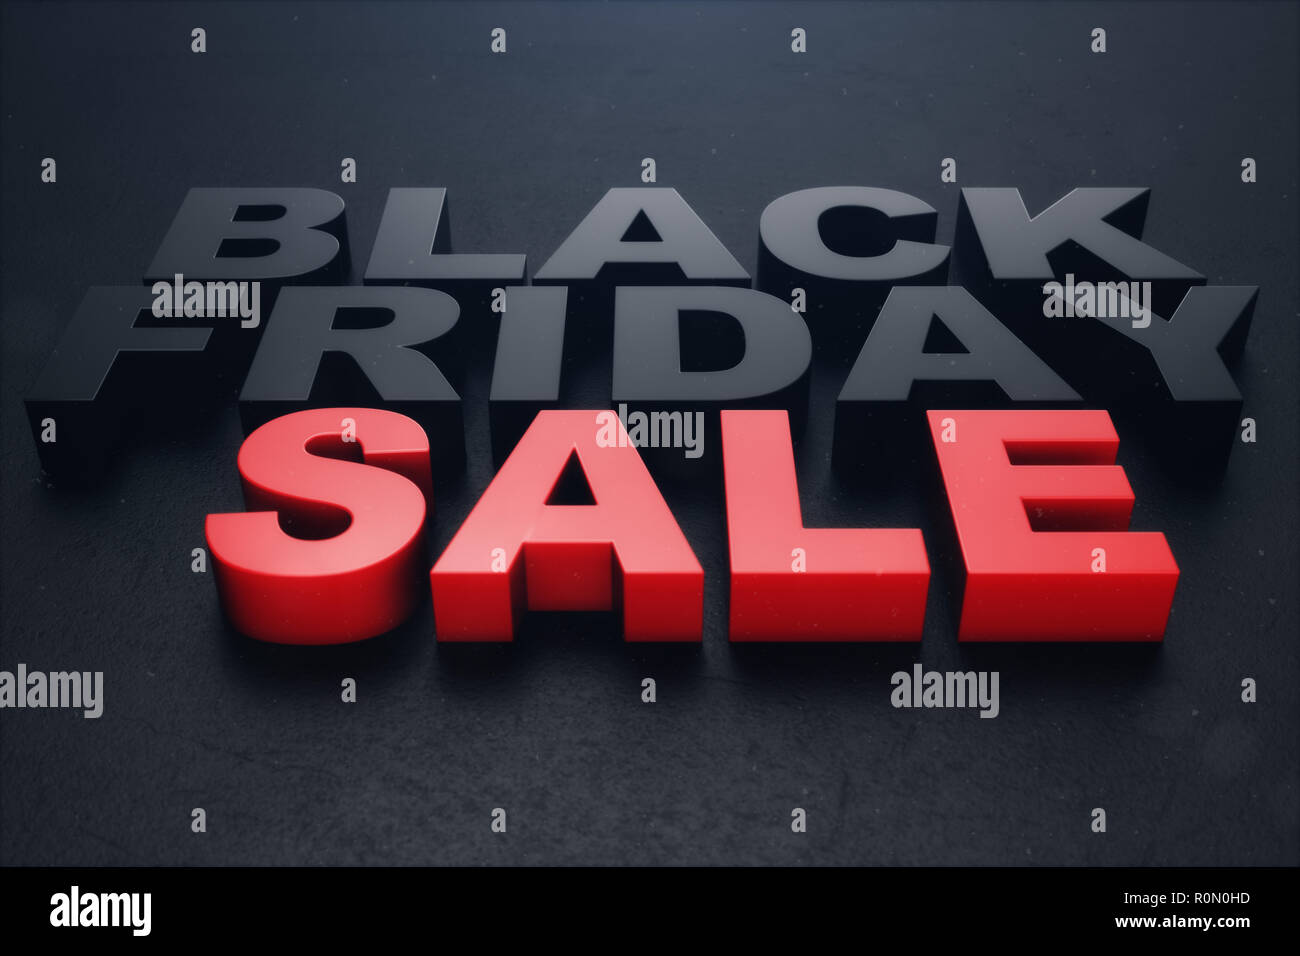 3d Illustration Black Friday Sale Message For Shop Business Shopping Store Banner For Black Friday 3d Text Black Friday Sale Inscription Design Te Stock Photo Alamy